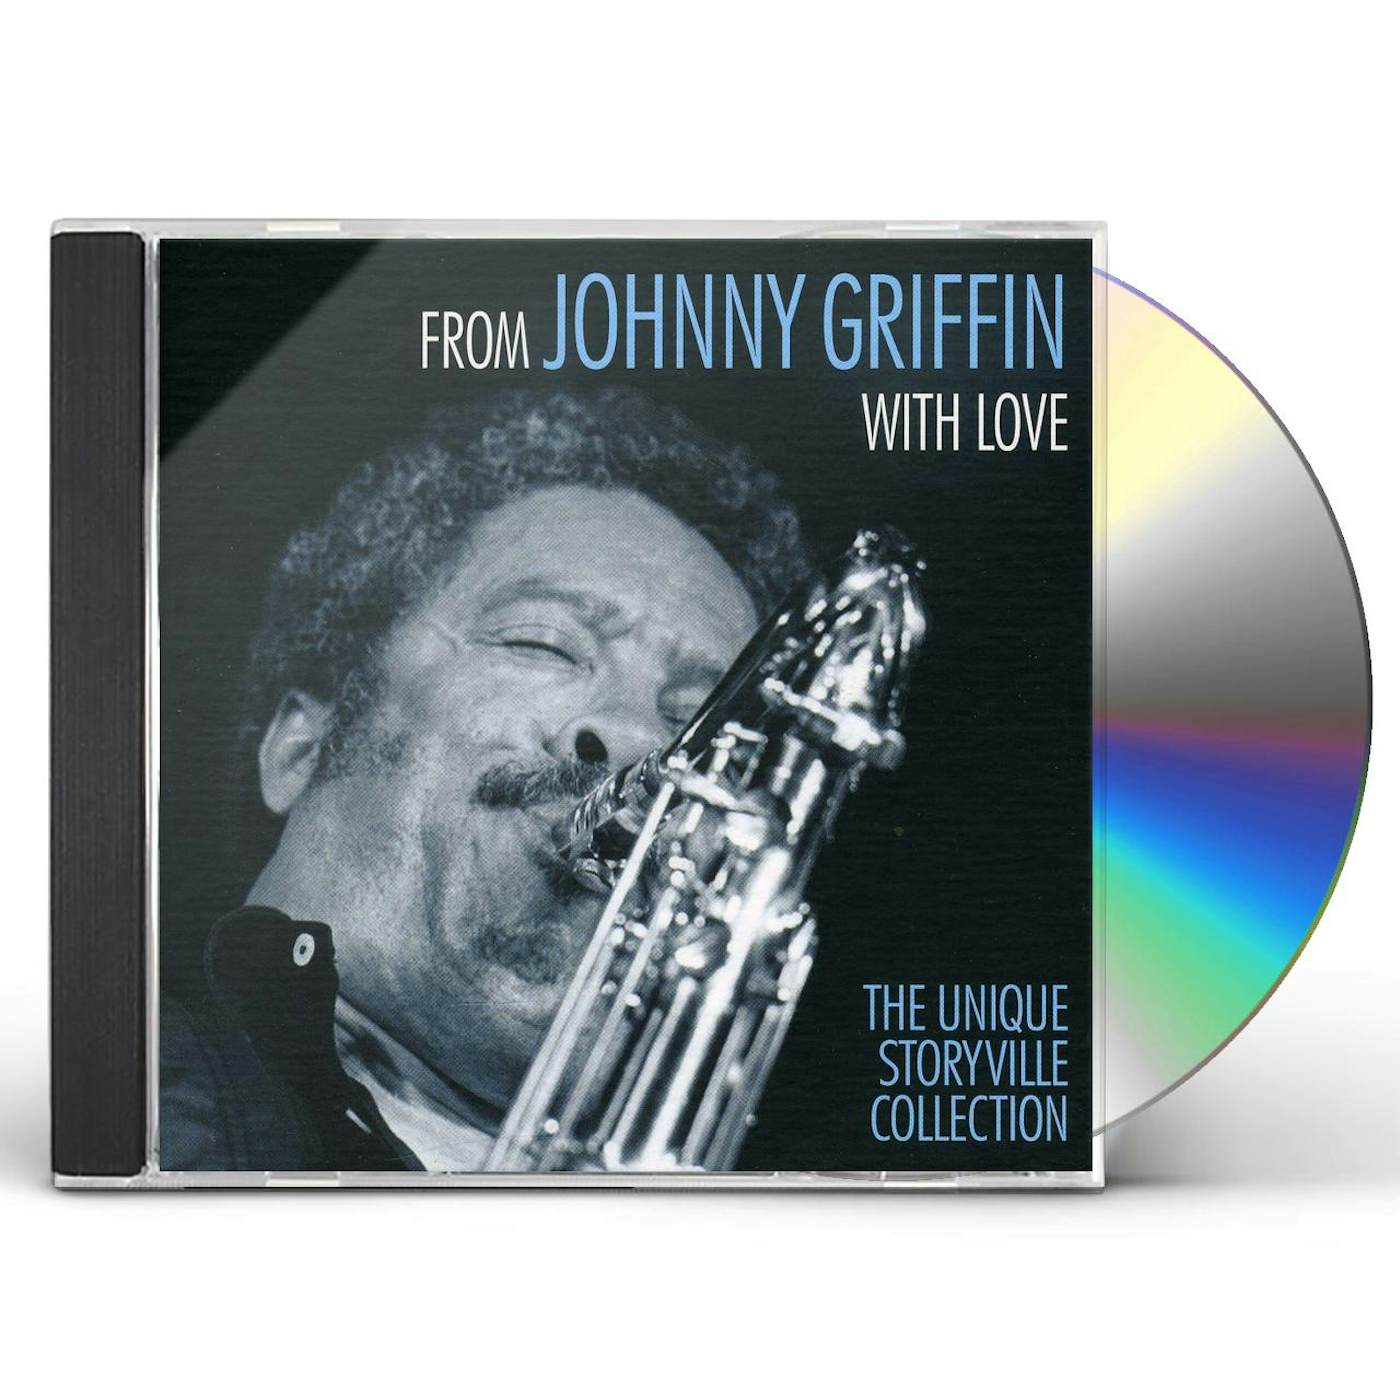 FROM JOHNNY GRIFFIN WITH LOVE CD